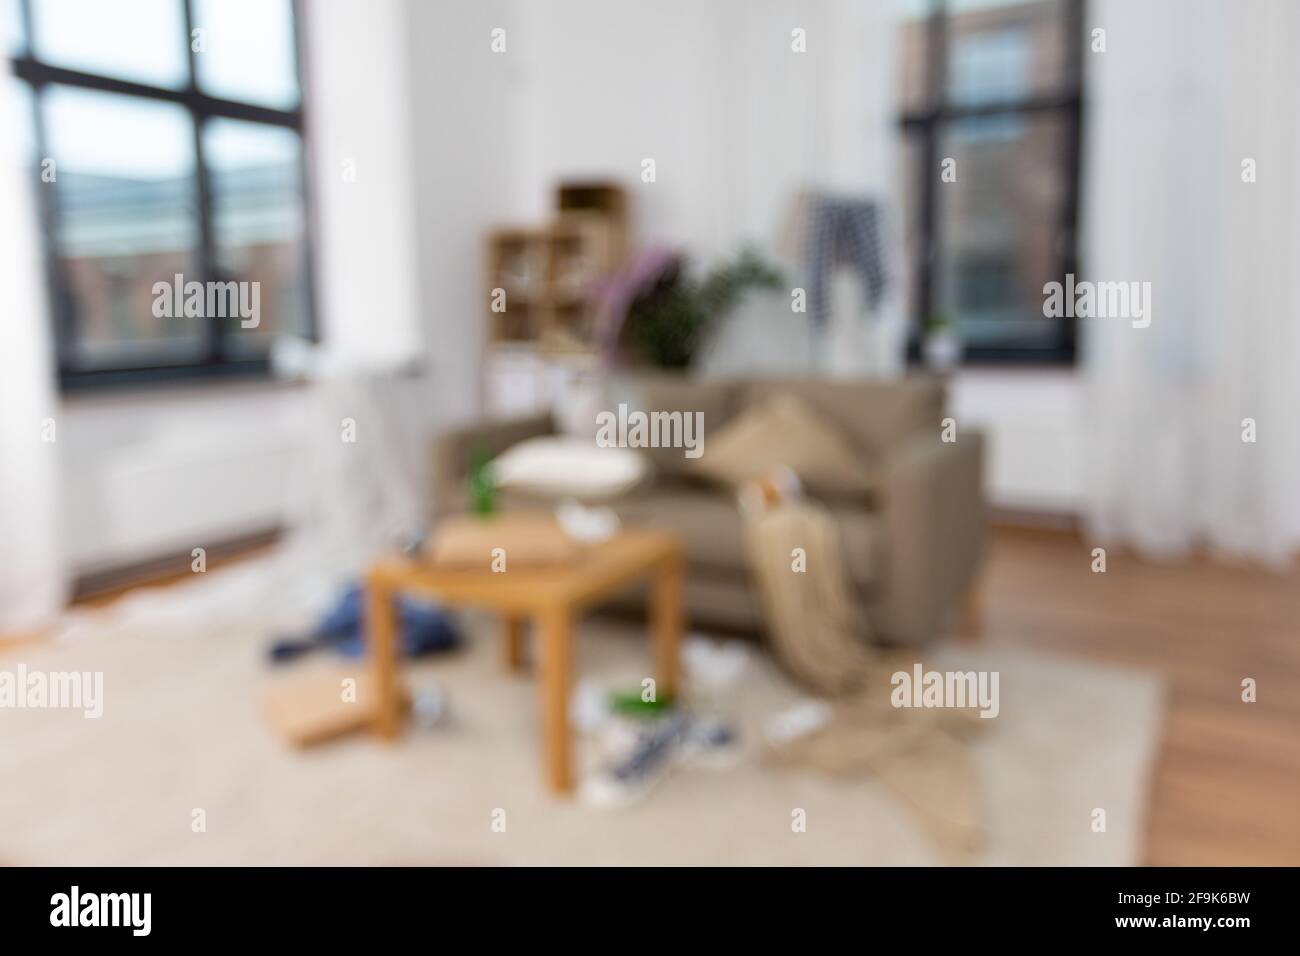 interior of messy home room with scattered stuff Stock Photo